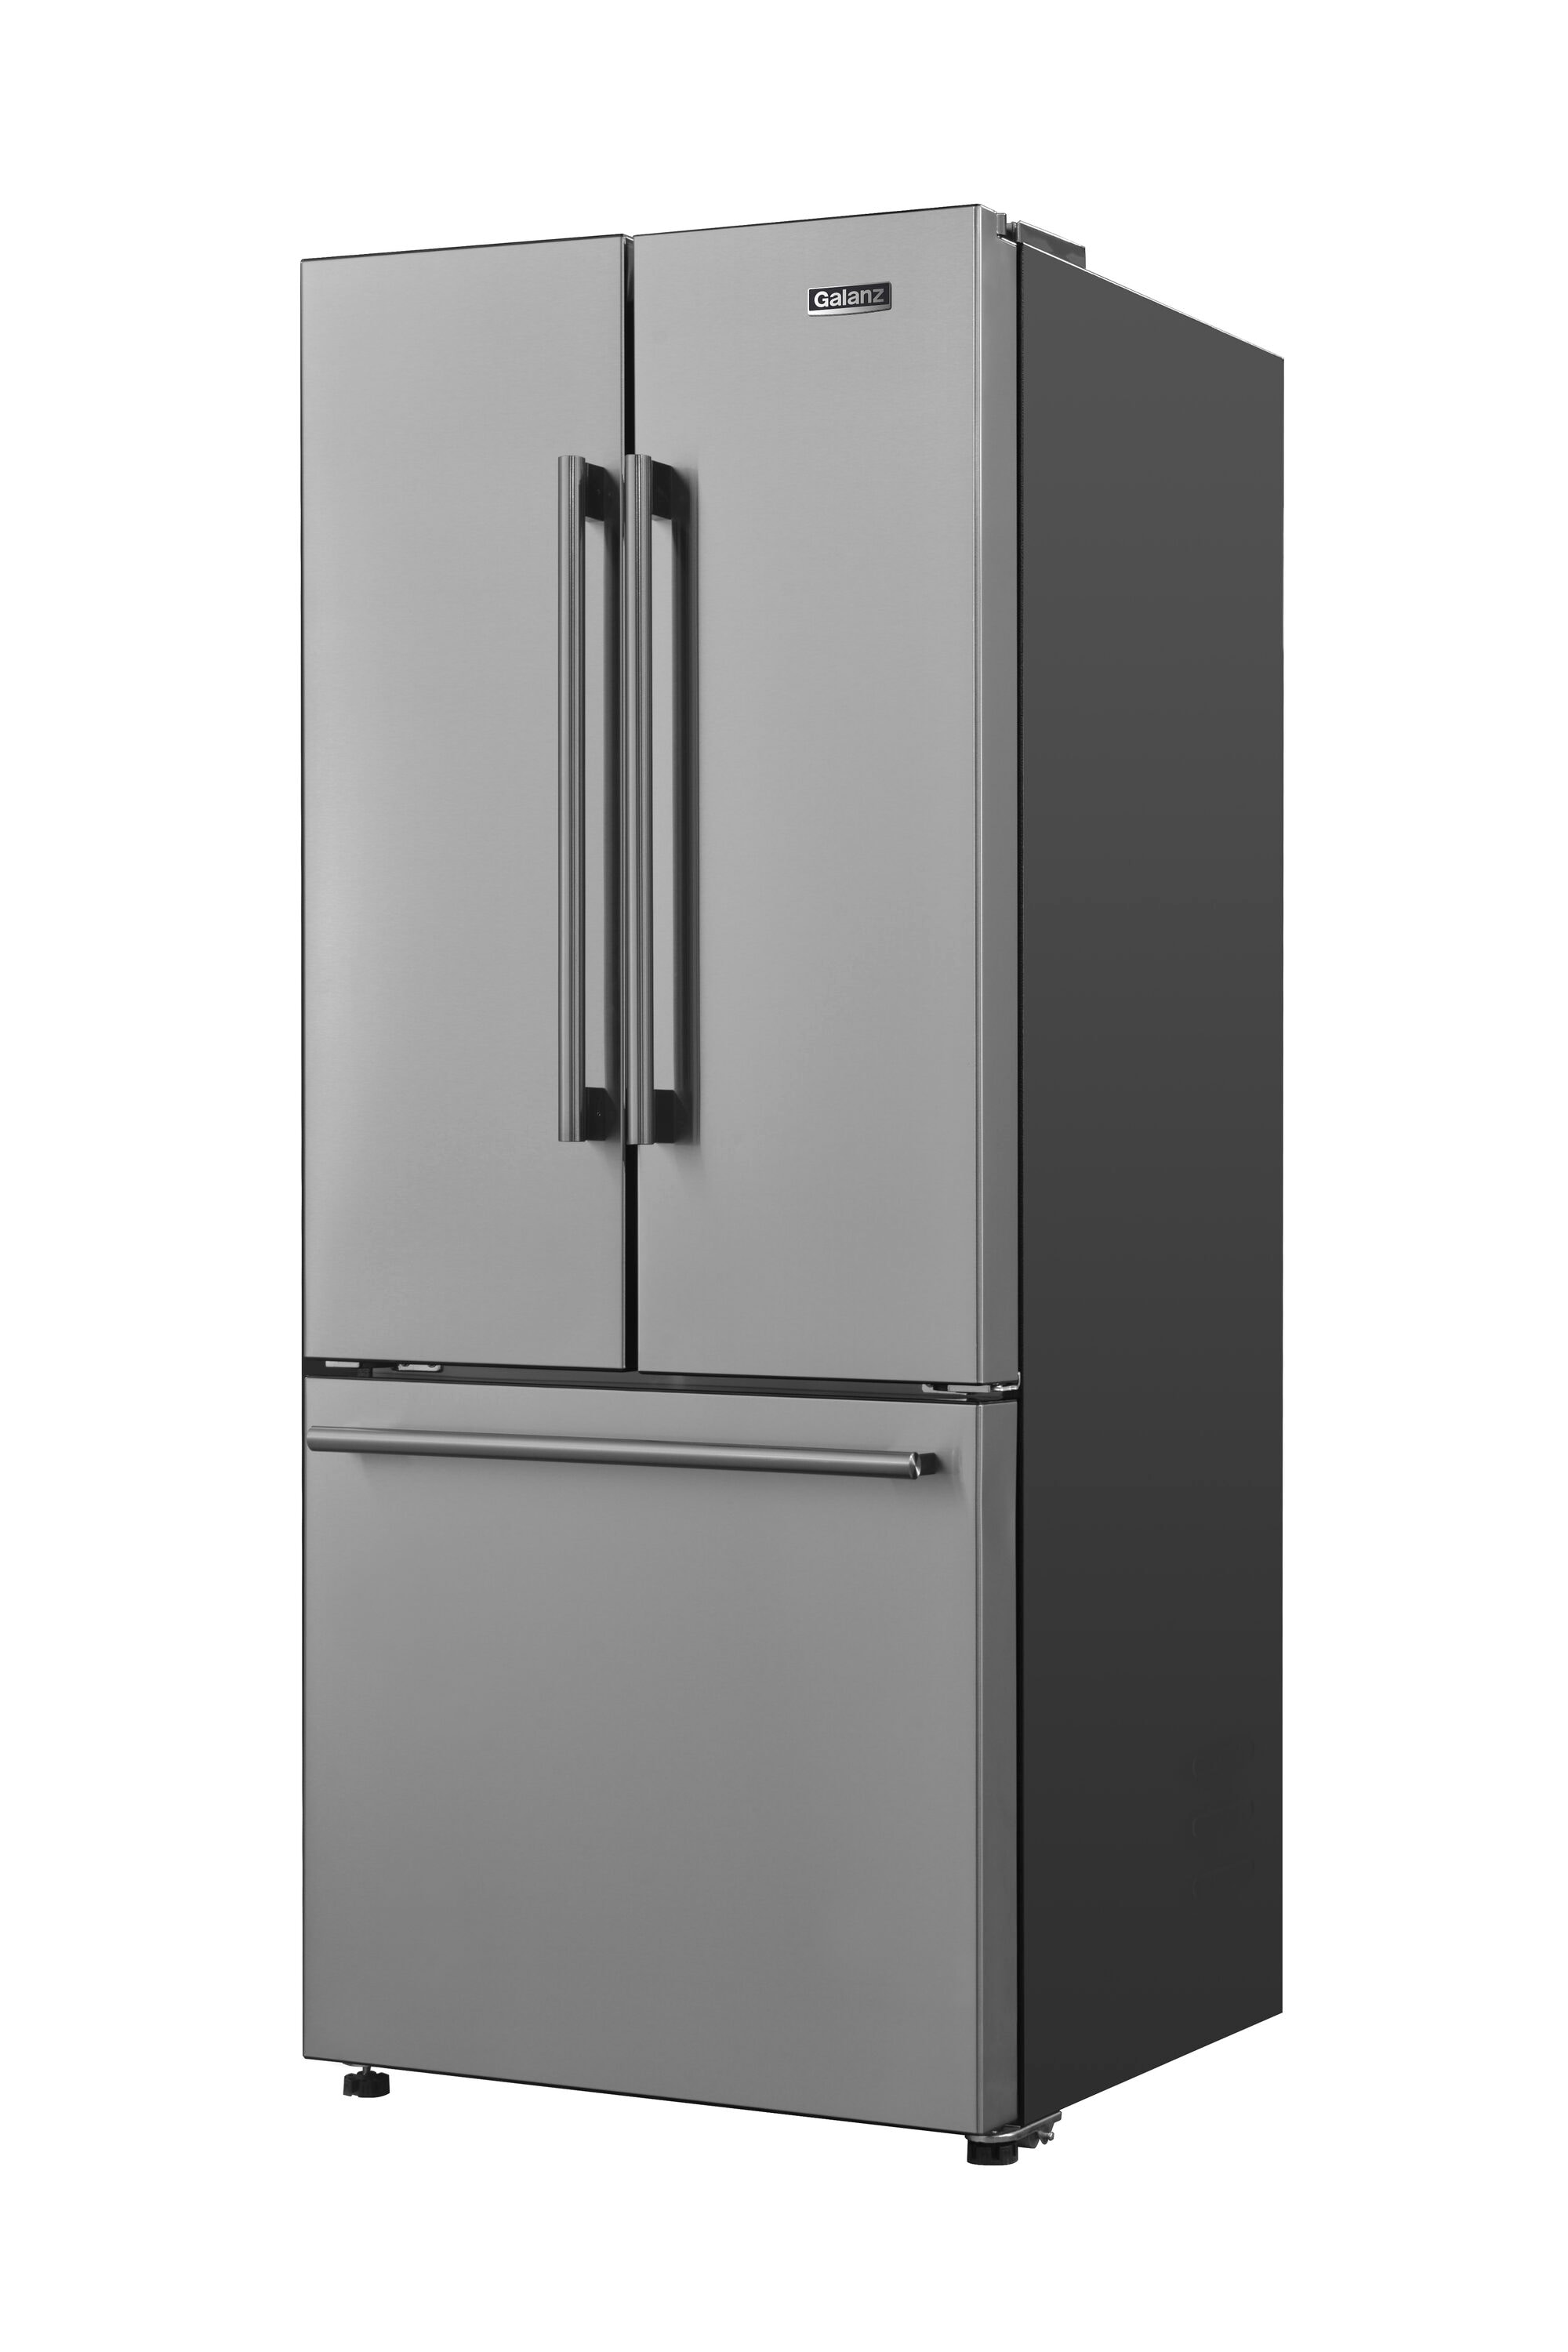 Galanz 16.0 Cu. Ft. Stainless Steel French Door Refrigerator